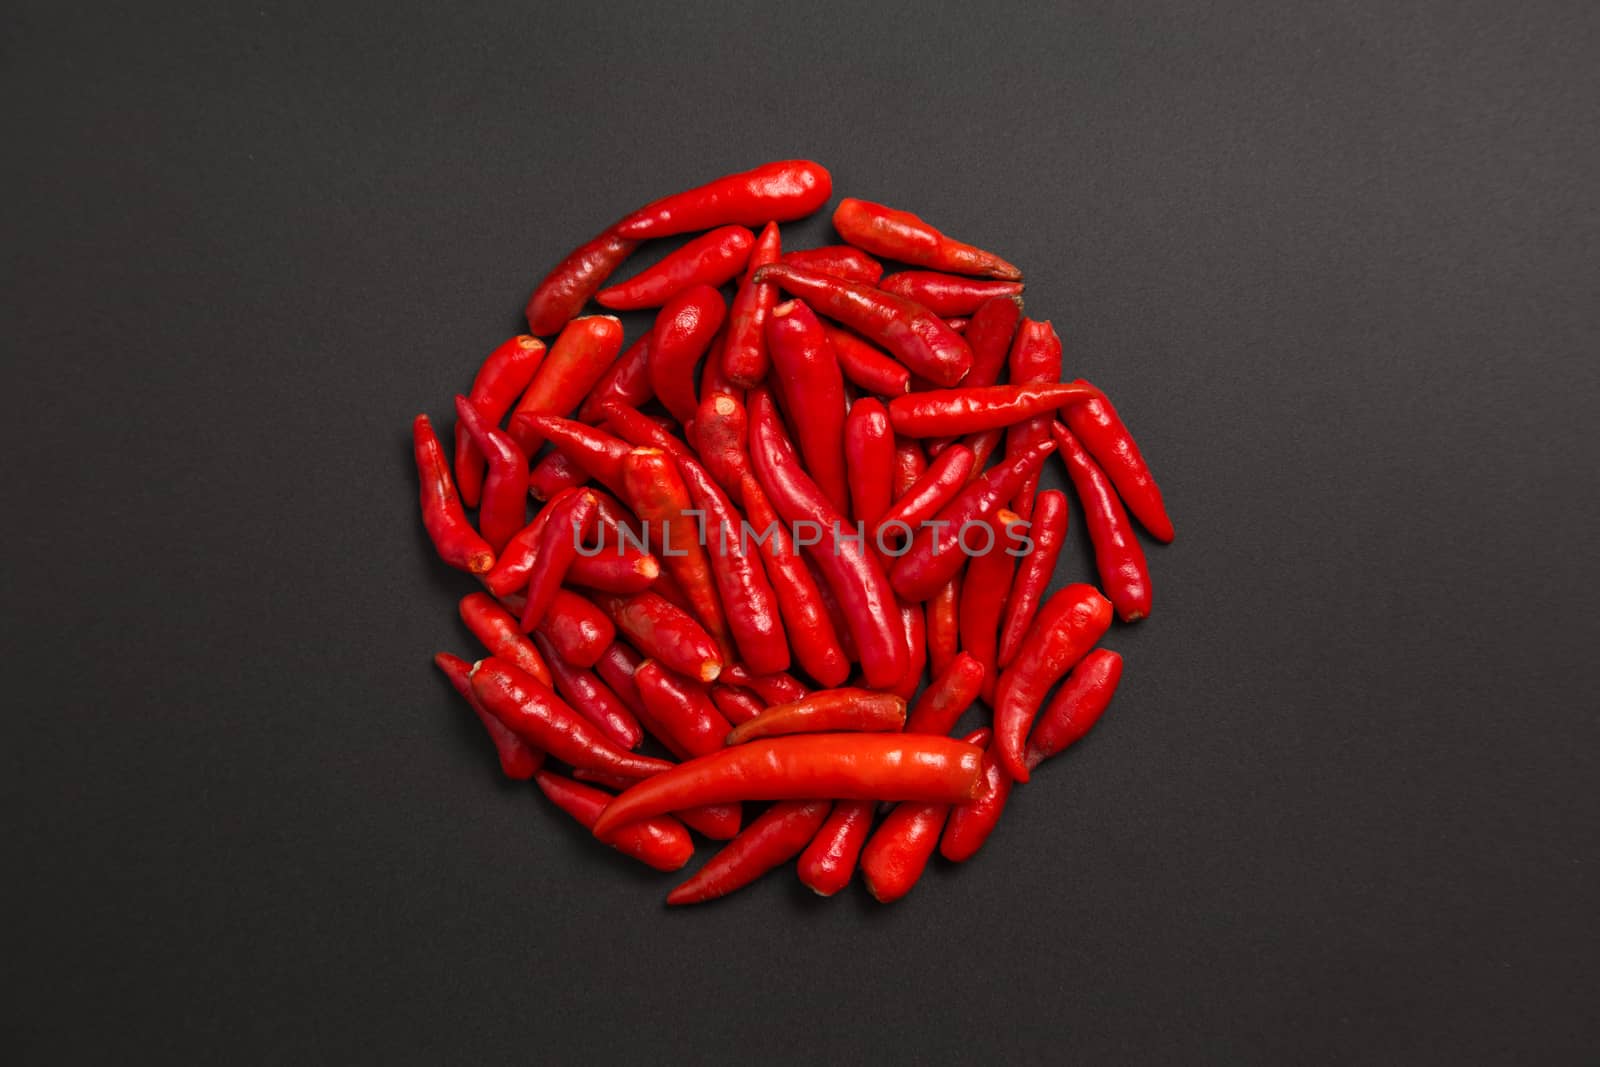 Circle made of non-stem red bird eye chili peppers on grey background 